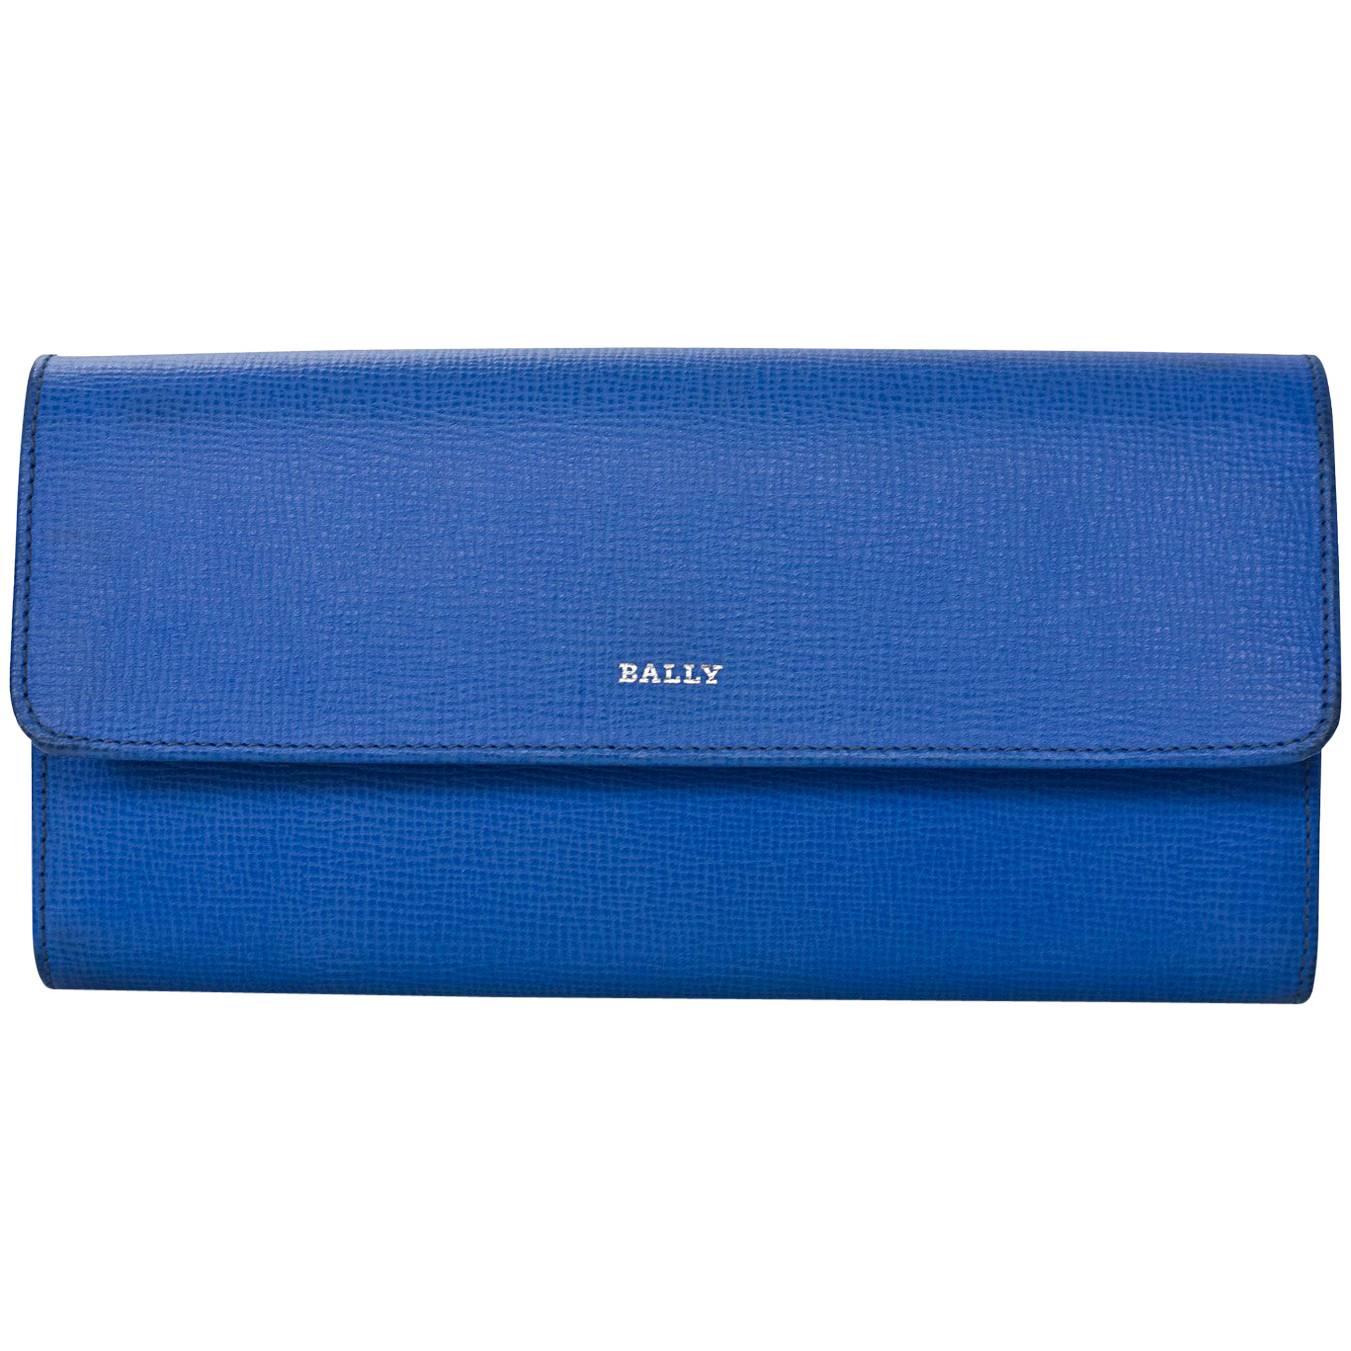 Bally Blue Embossed Leather Continental Wallet with Box